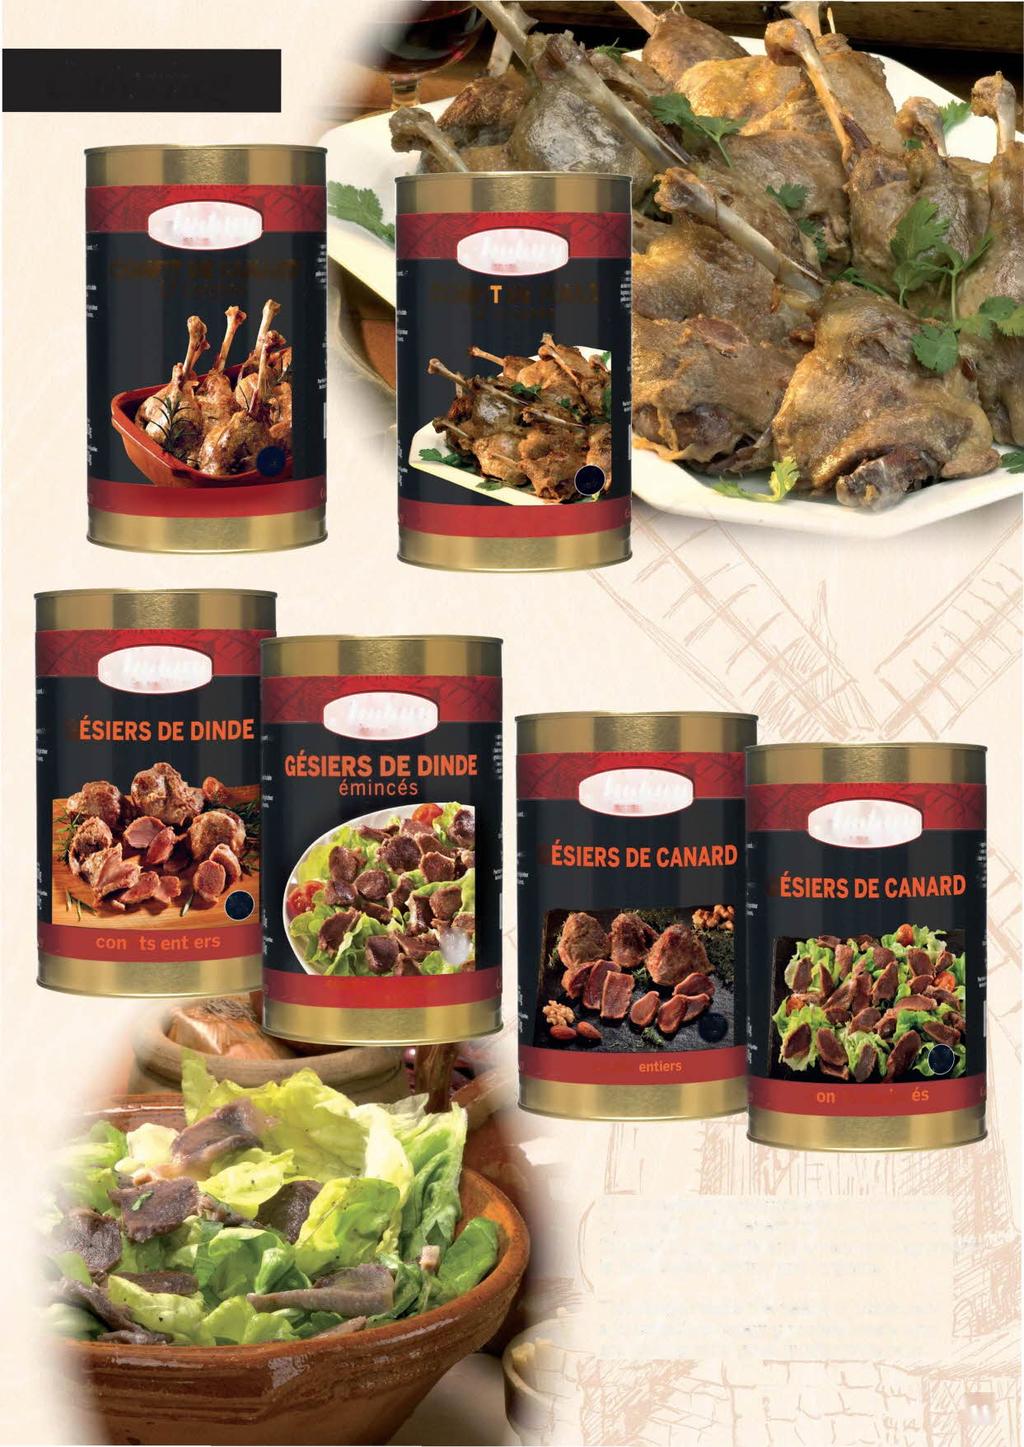 Catering Ali our catering products are of